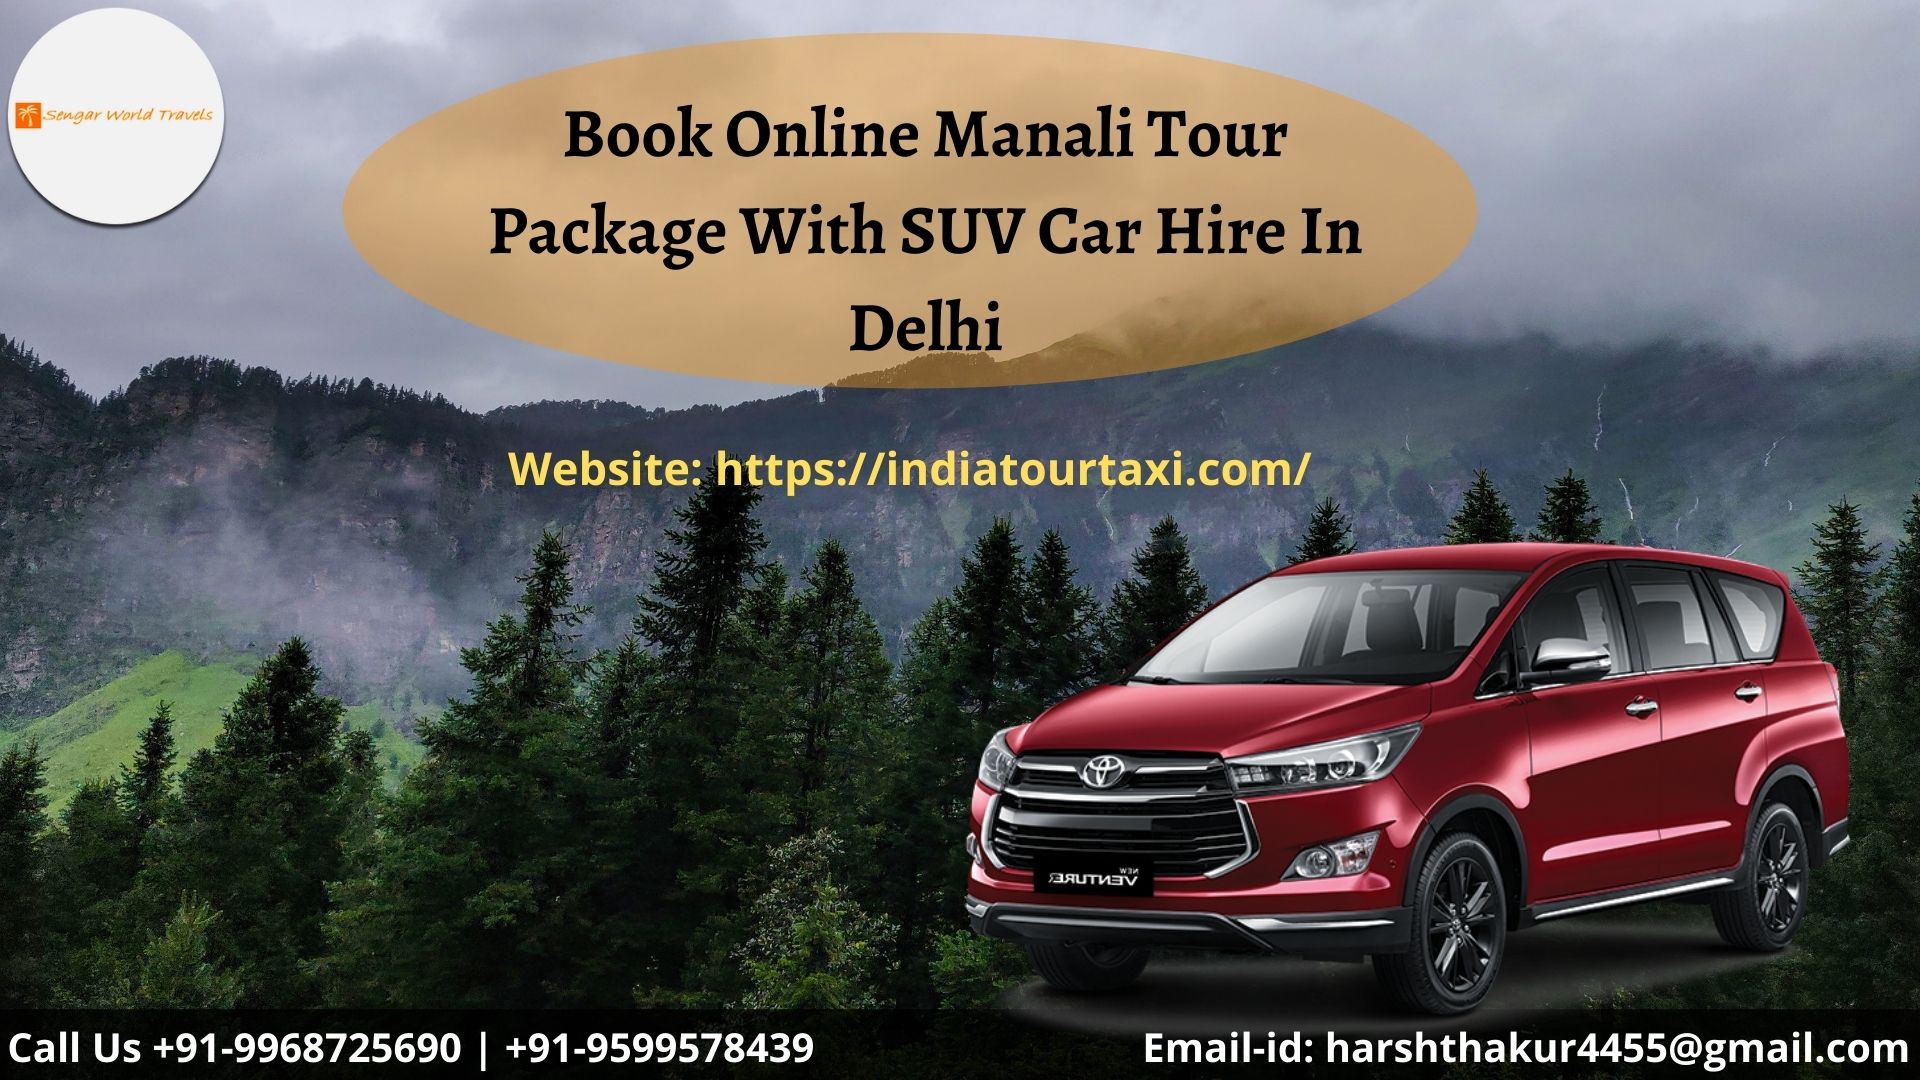 Book Online Manali Tour Package With SUV Car Hire In Delhi-2a42c679